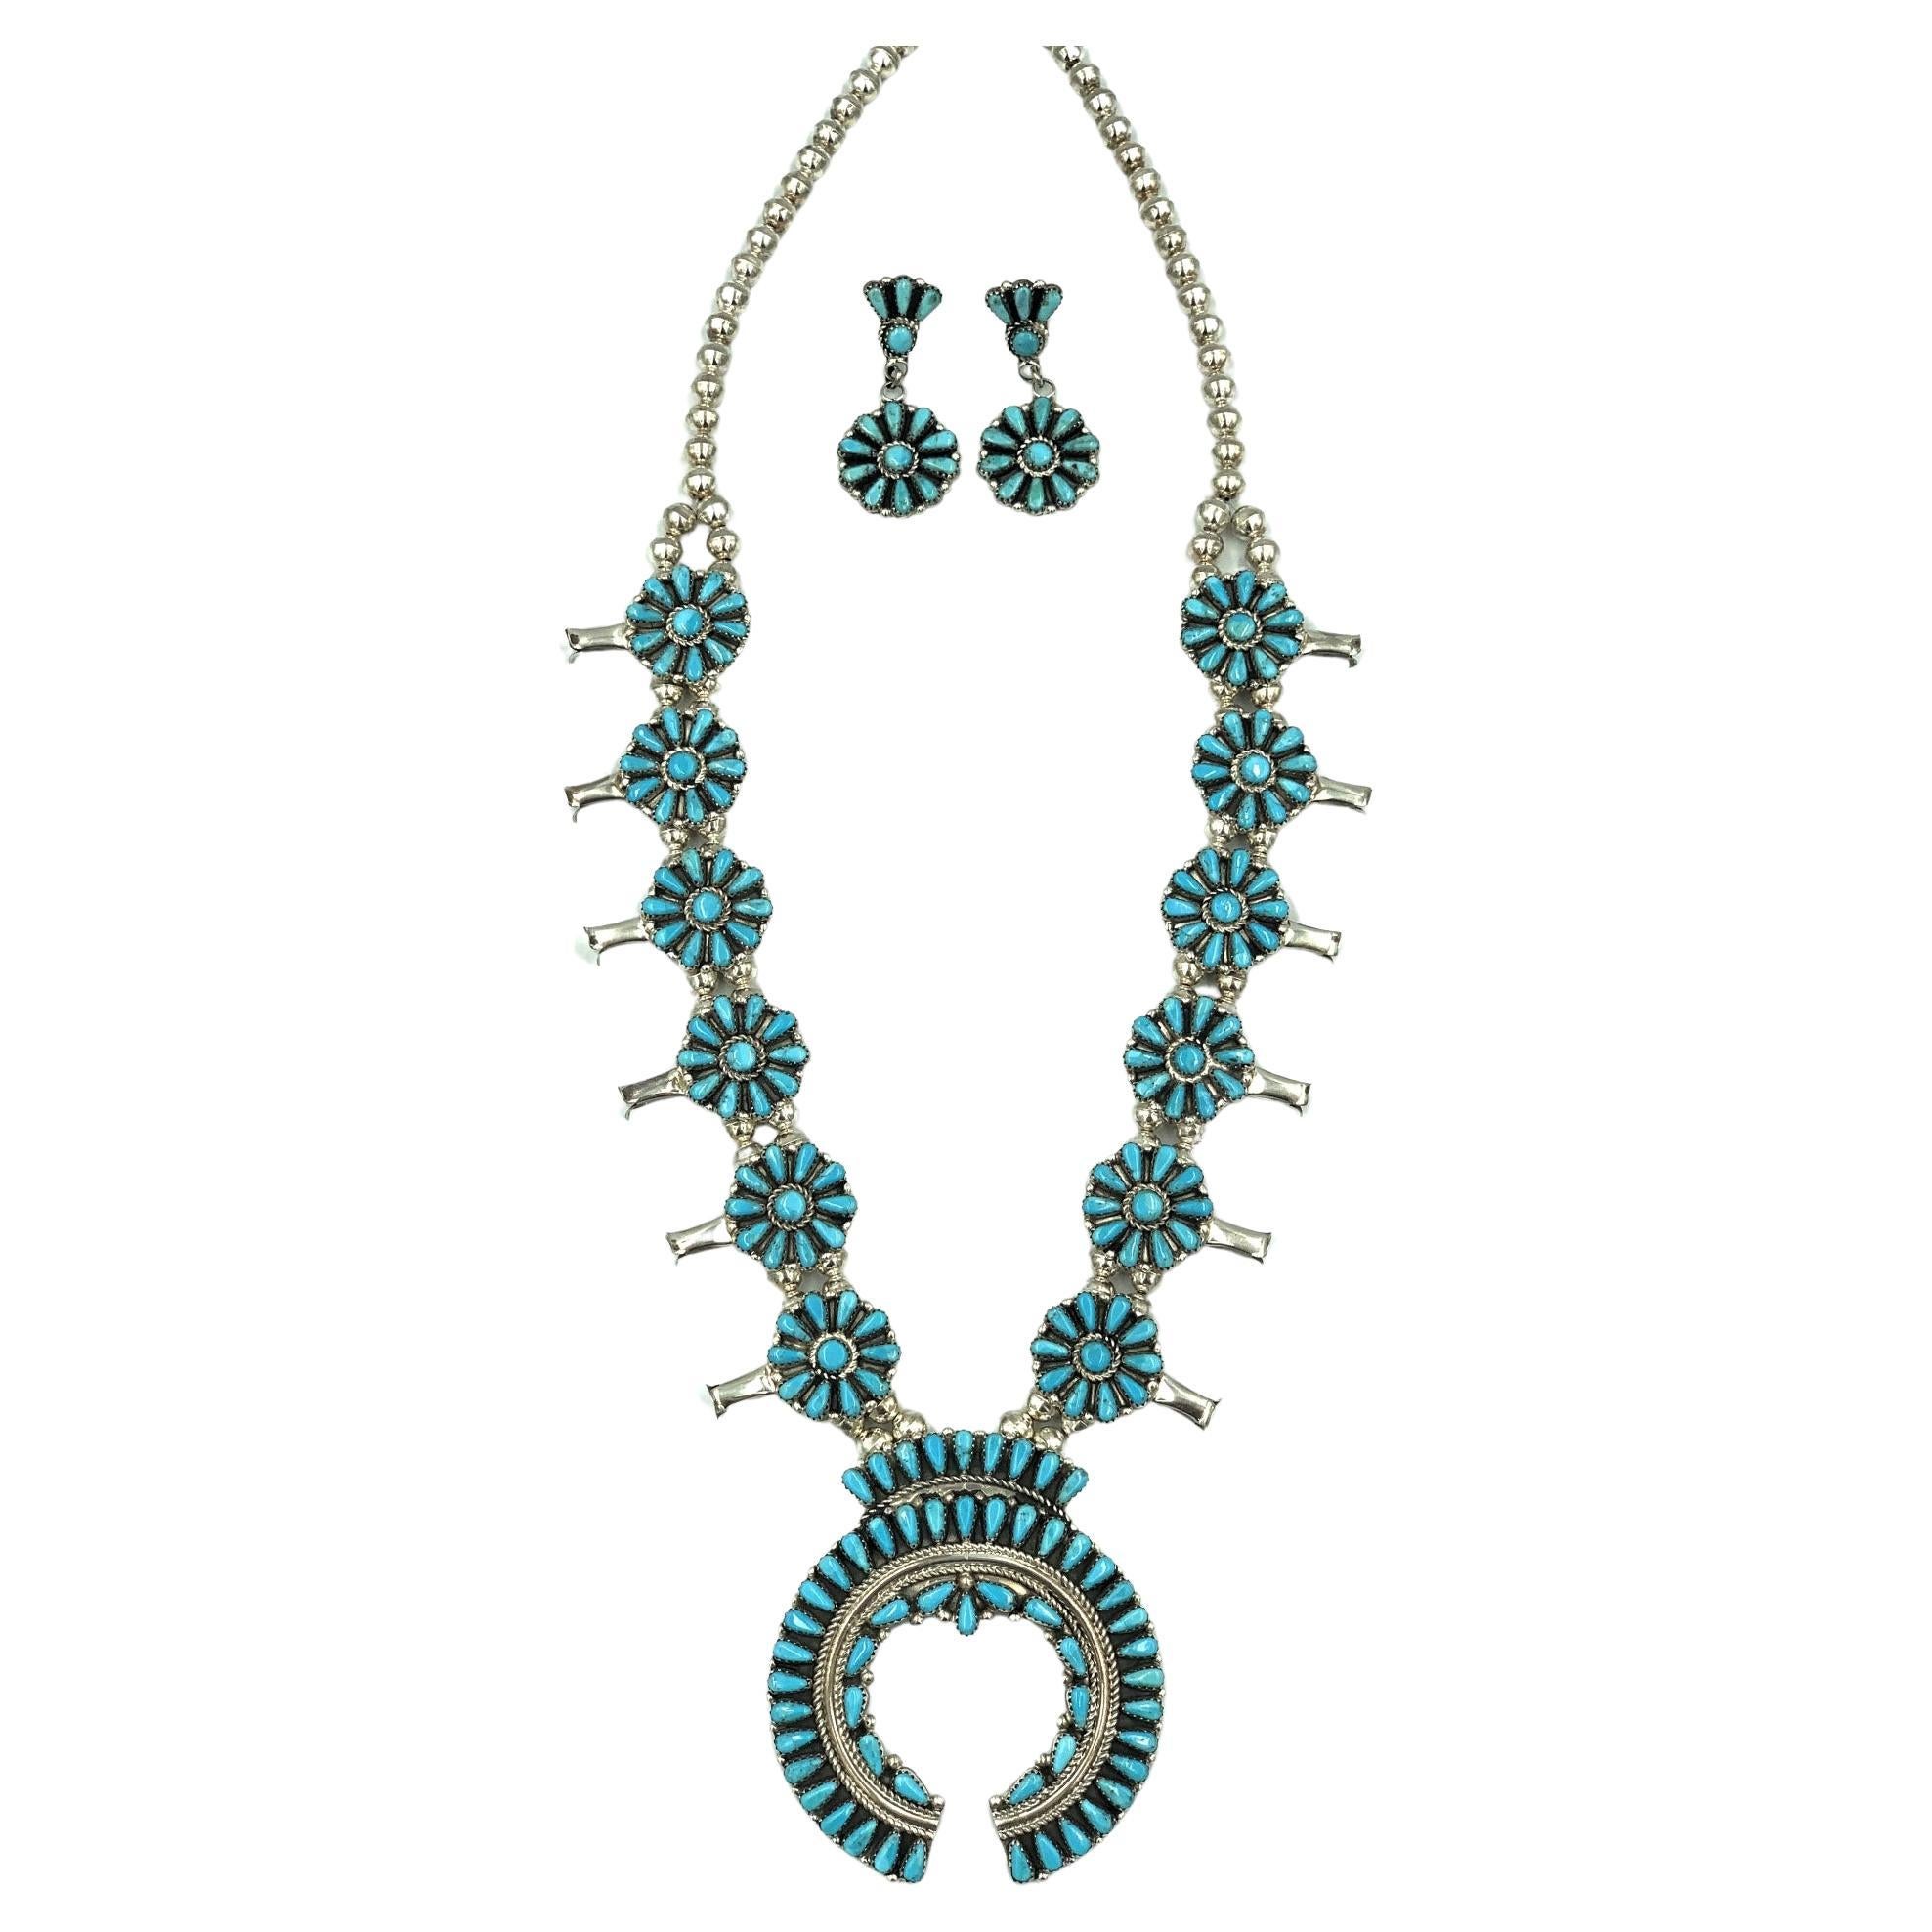 Sleeping Beauty Turquoise Squash Blossom Necklace and Earring Set by Violet Nez